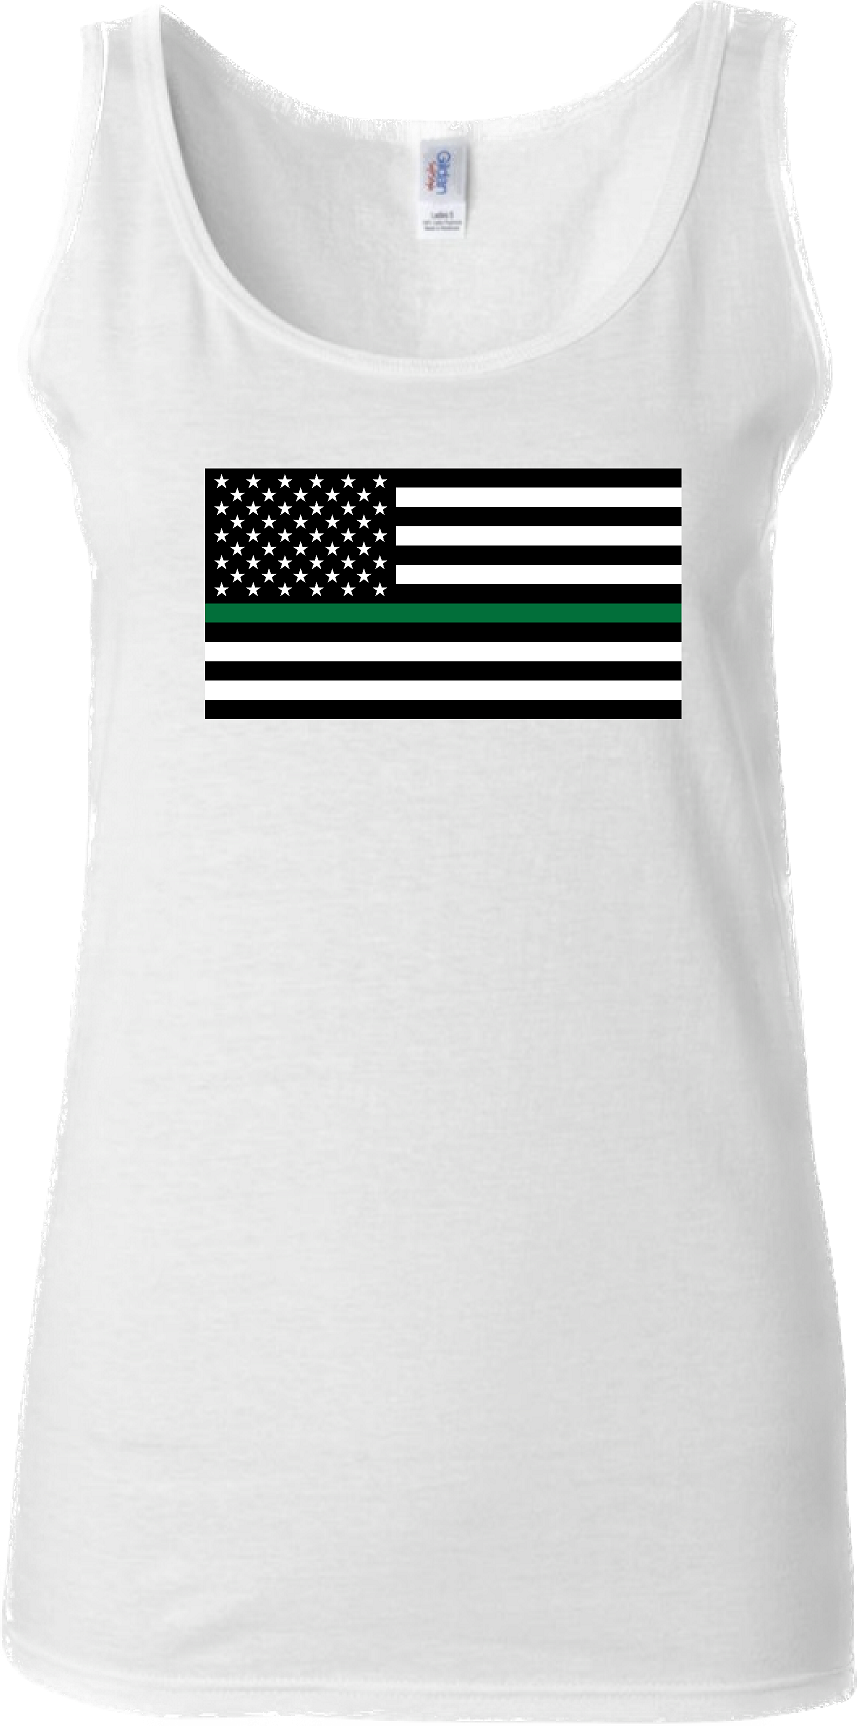 Women’s Thin Green Line United States Flag Tank Top